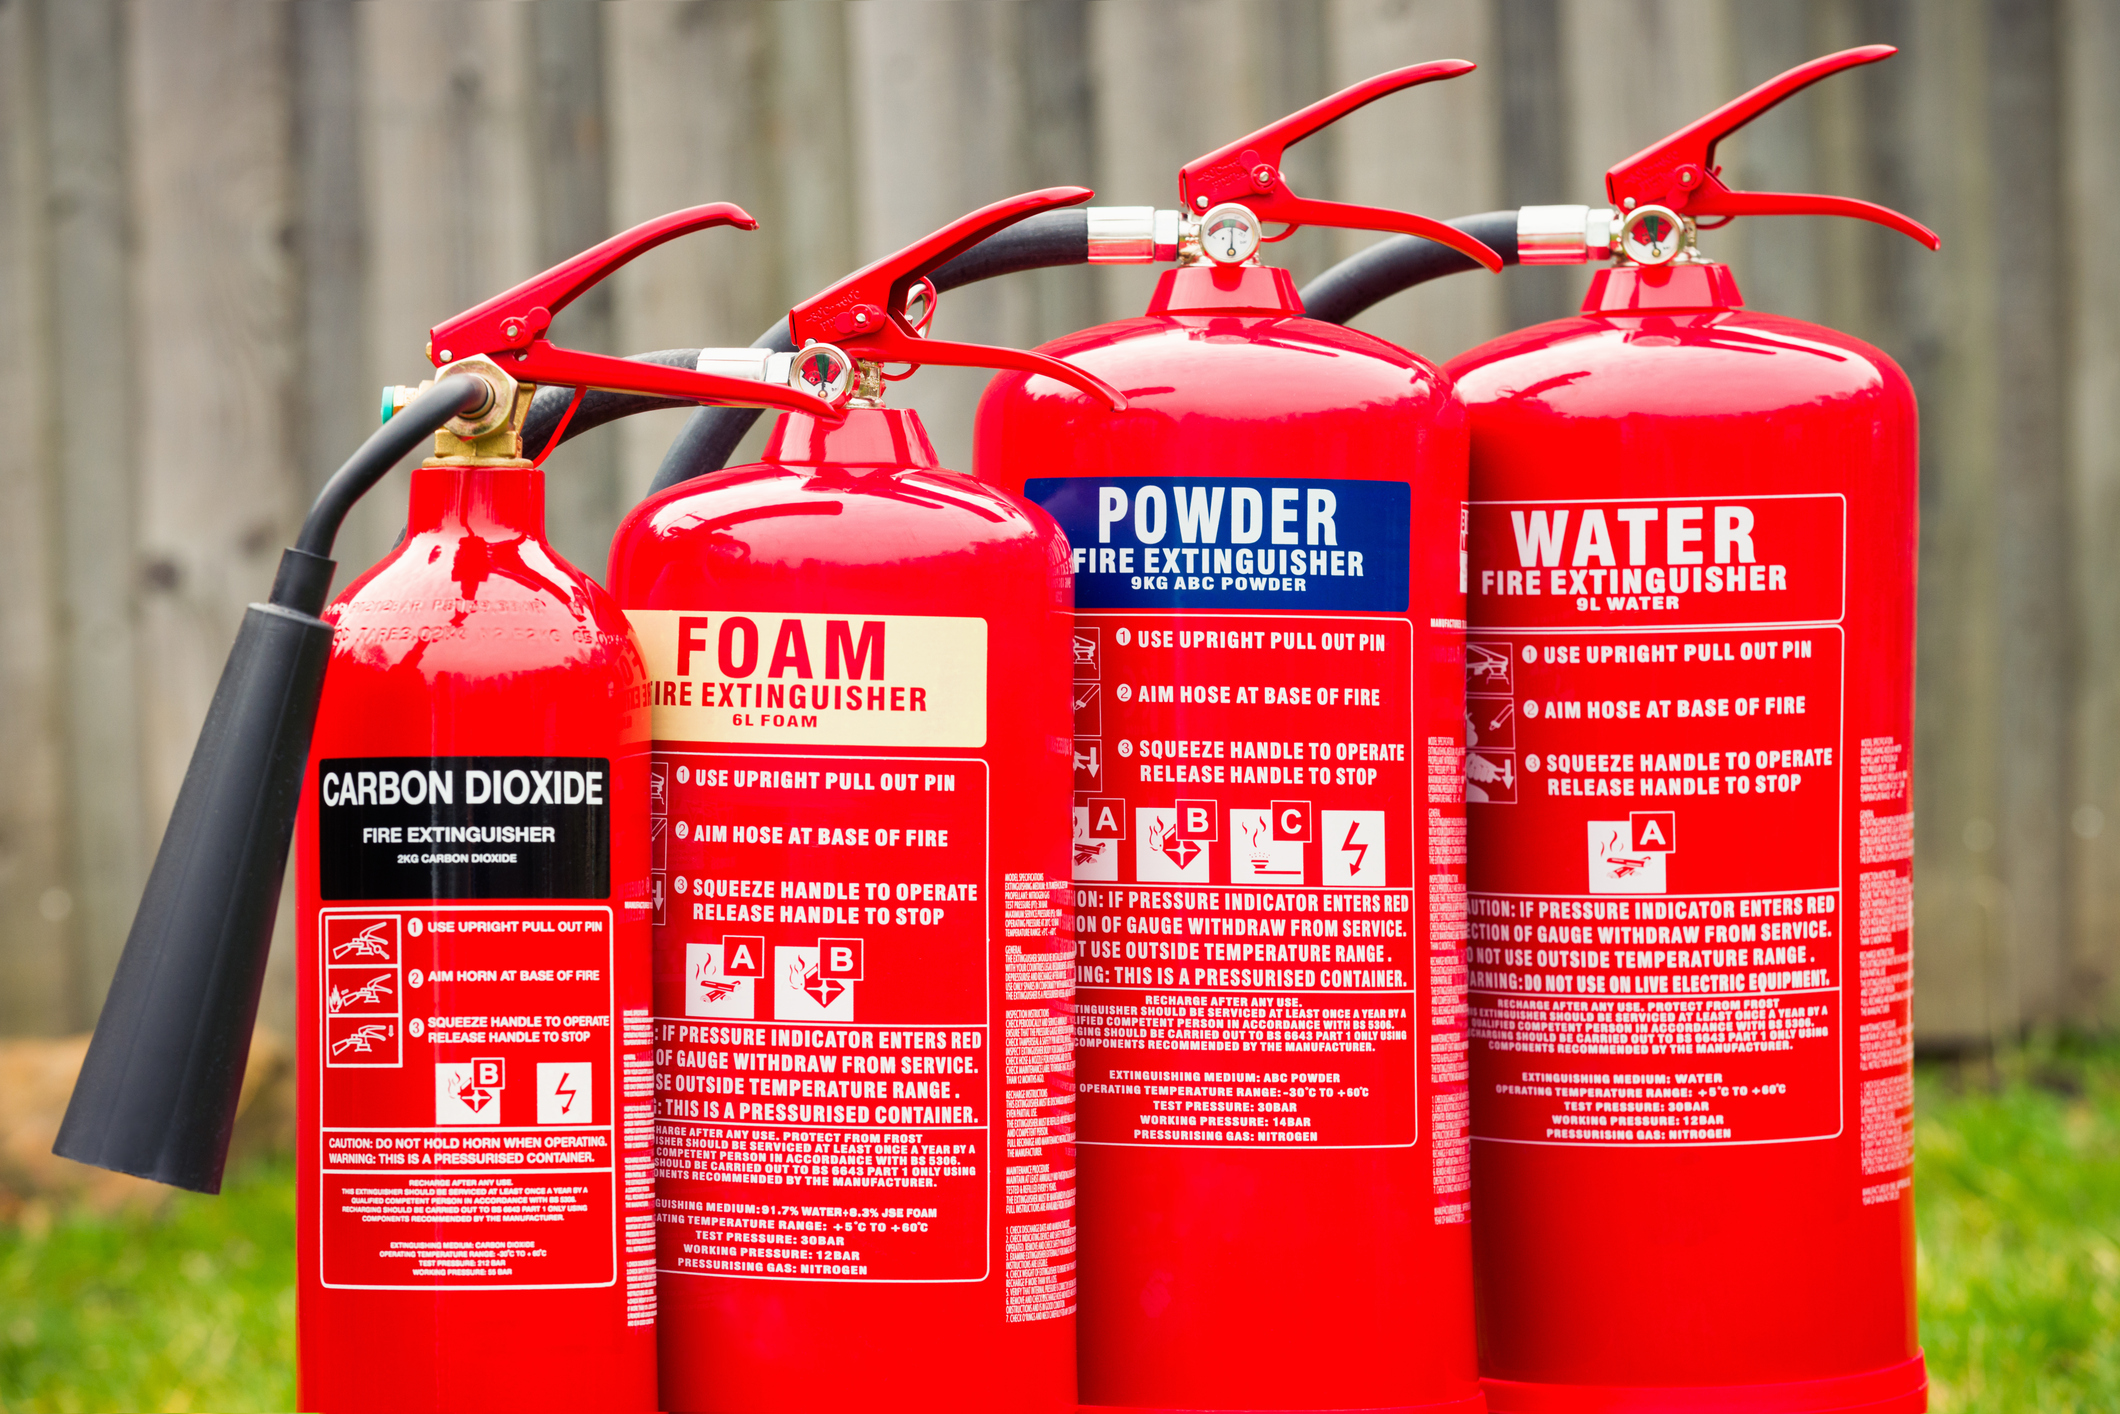 How To Use A Fire Extinguisher Hubpages - Reverasite